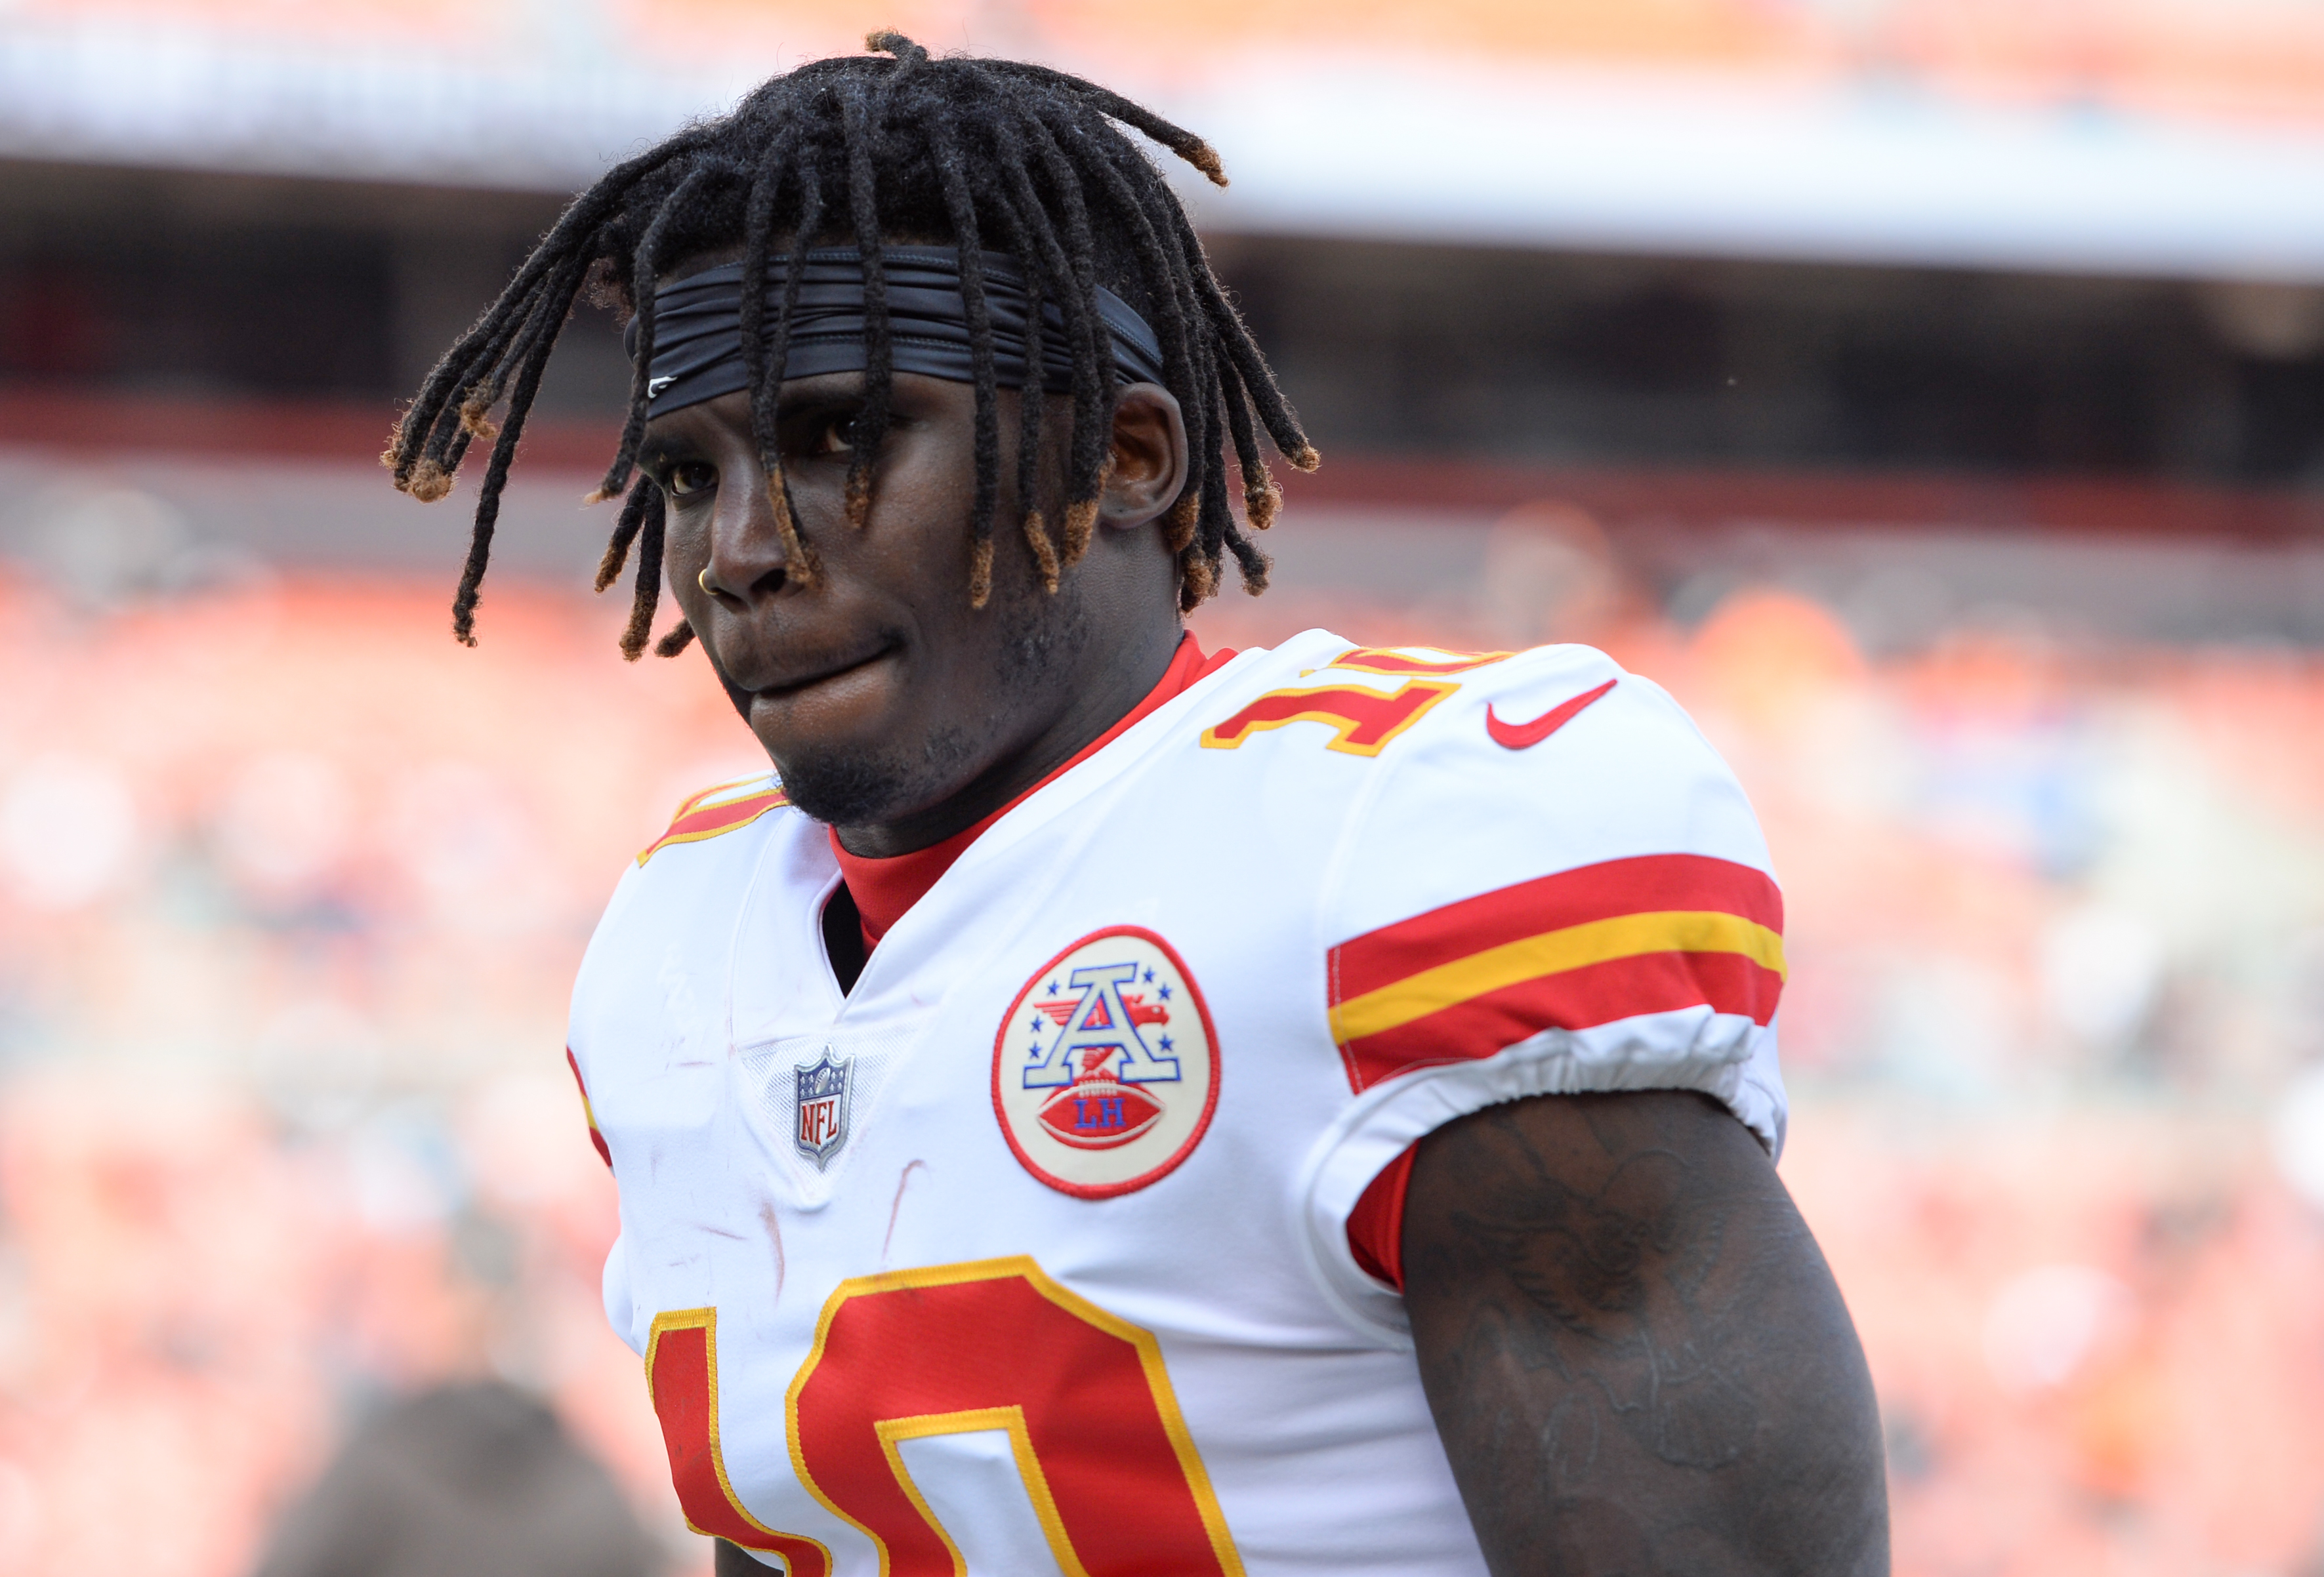 Is Tyreek Hill Leaving Chiefs? Kansas City WR Trade Rumors All Over As He Gets Permission To Consider Others